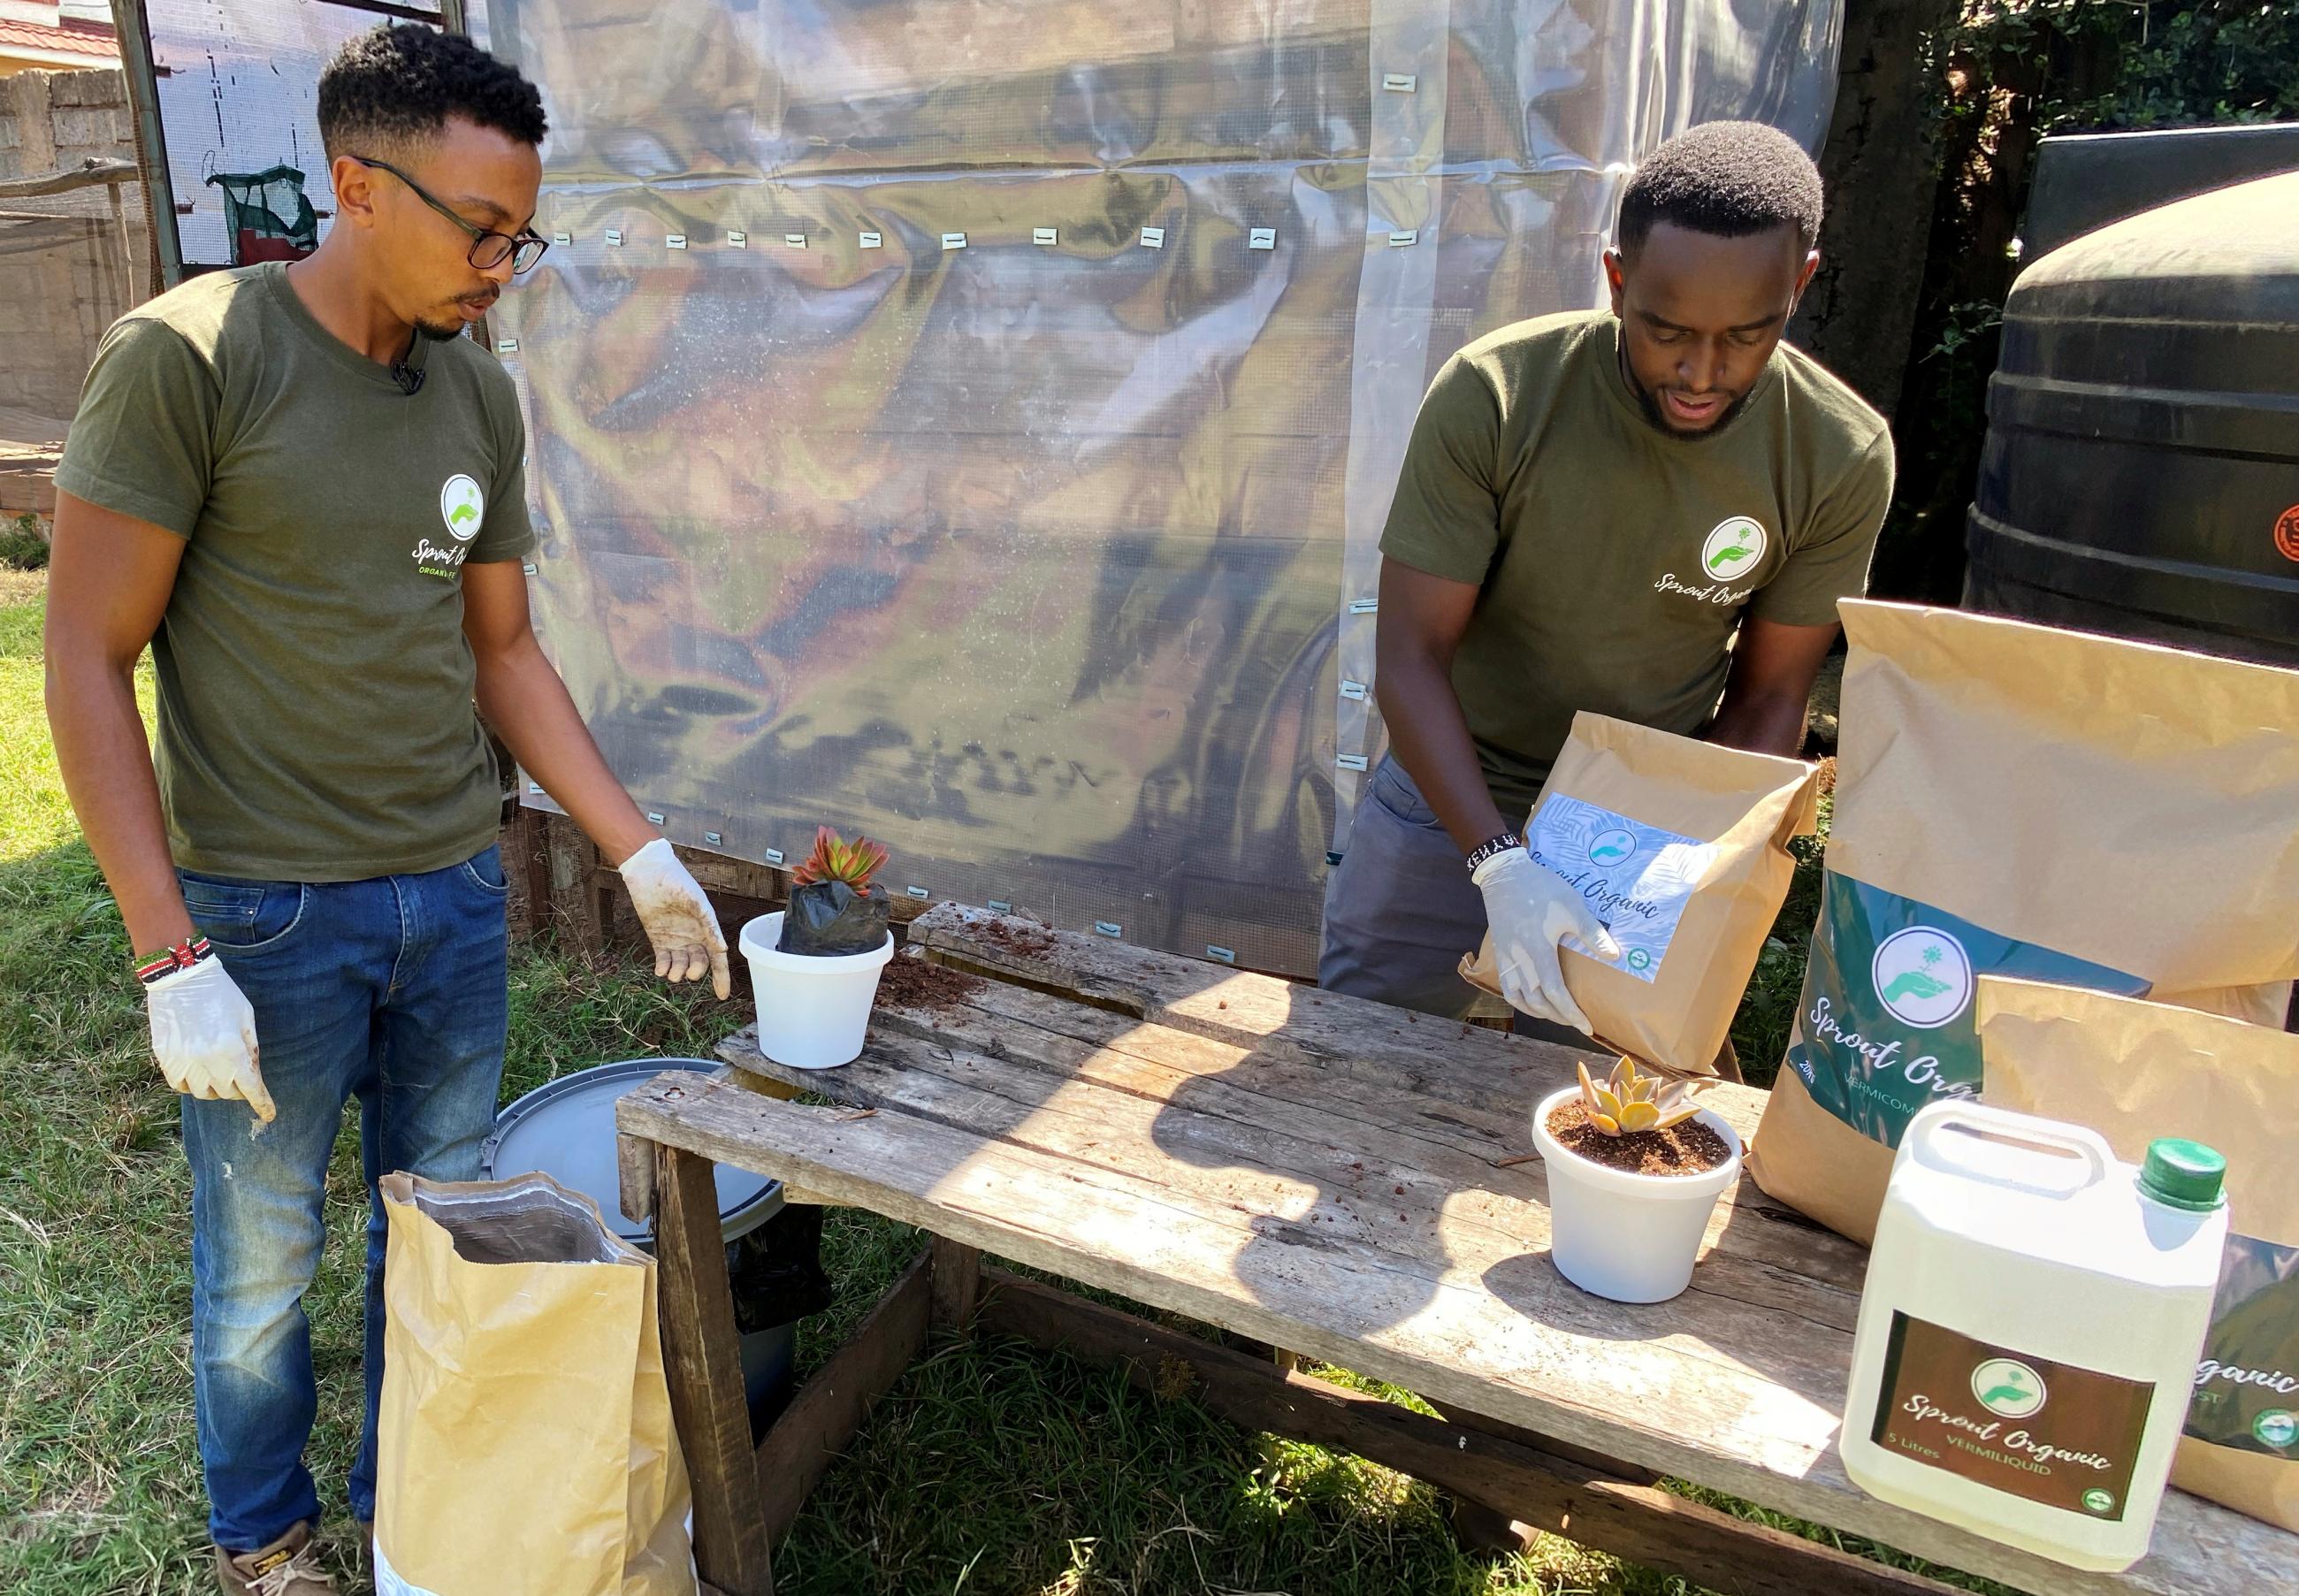 Ted Gachanga and Michael Kanywiria agronomists who co-own Sprout Organic company carry samples of a compost that is sold to urban farmers to grow food in squeezed spaces during the coronavirus disease (COVID-19) outbreak in Nairobi, Kenya June 30, 2020.